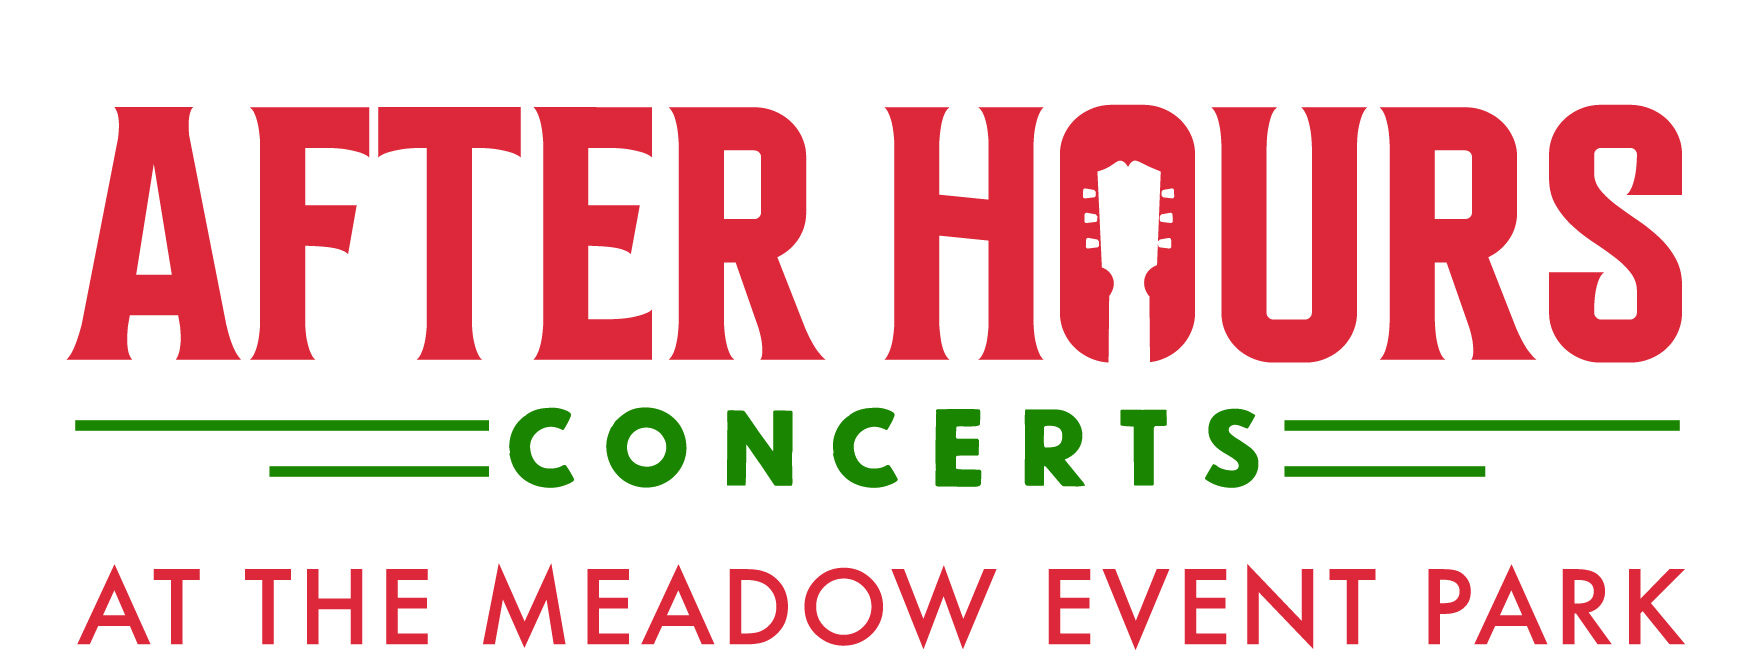 CHRIS LANE TO PERFORM AS PART OF THE AFTER HOURS CONCERT SERIES AT THE